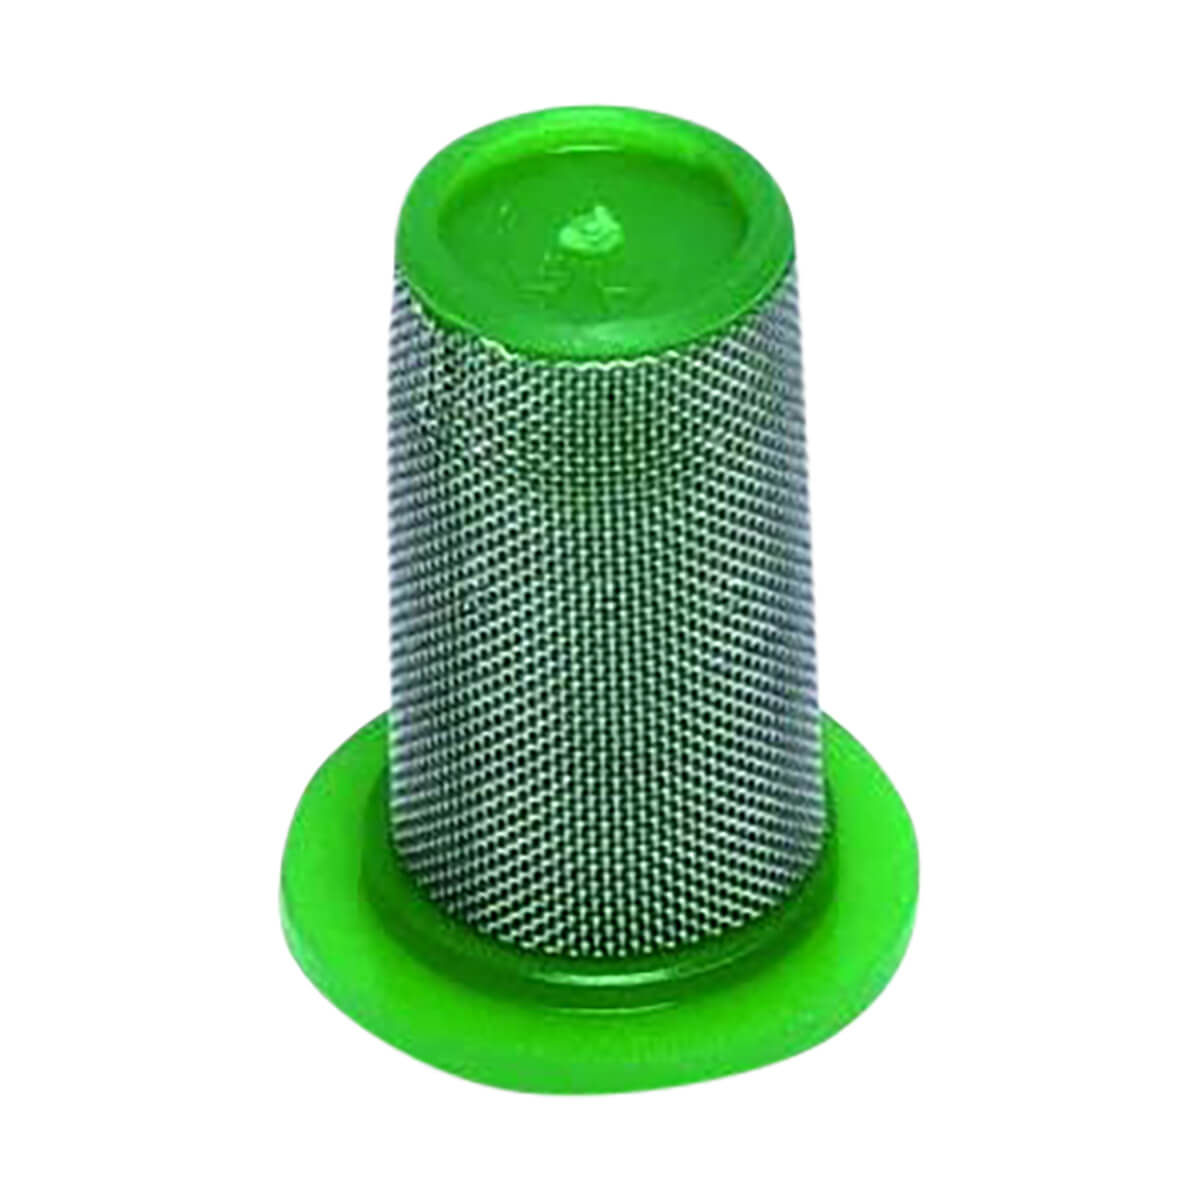 Nozzle Filter 100 Mesh Green Stainless Steel Teejet